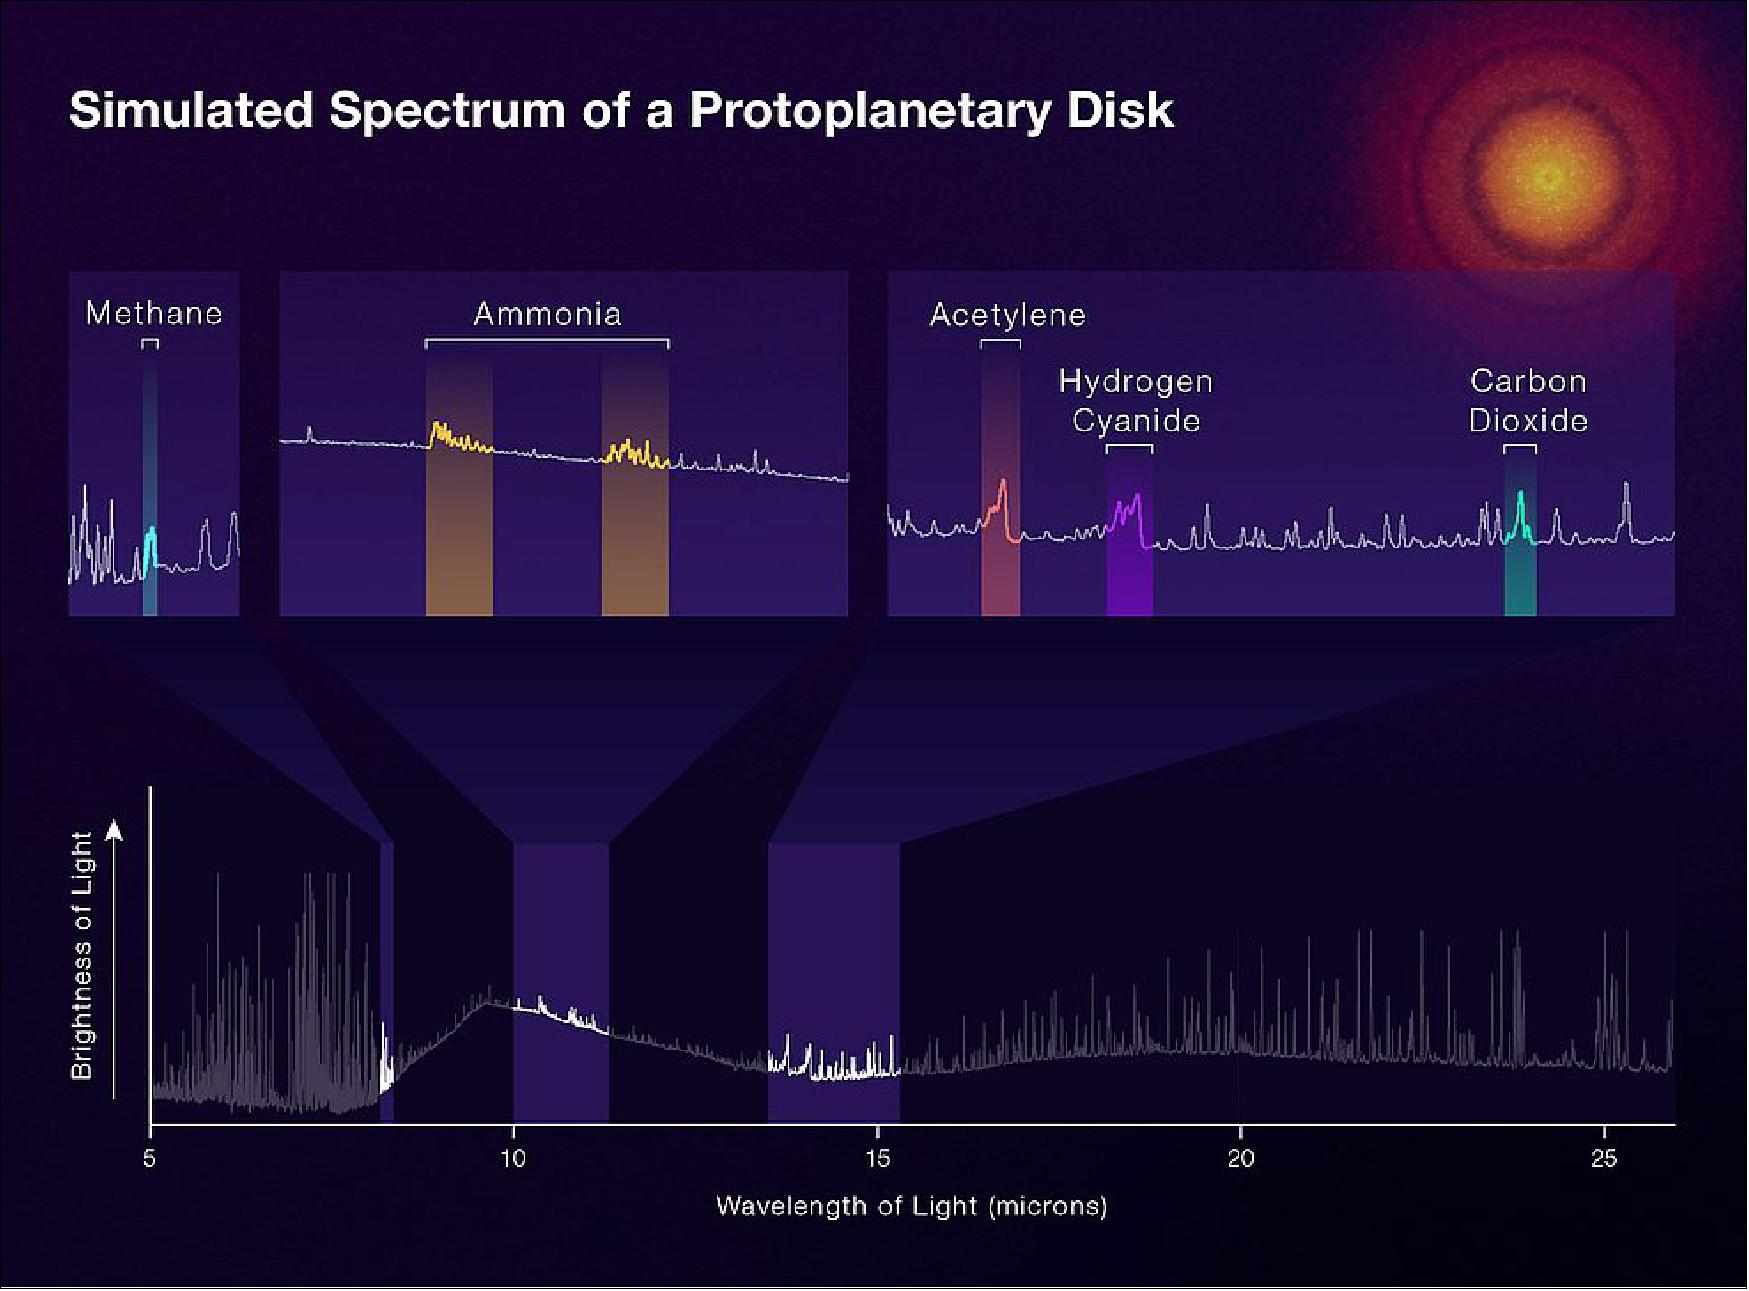 Figure 13: The MIRI of Webb will deliver incredibly rich information about the molecules that are present in the inner disks of still-forming planetary systems (known as protoplanetary disks). This simulated spectrum, which produces a detailed pattern of colors based on the wavelengths of light emitted, helps researchers take inventories of each molecule. This spectrum shows how much of the gasses like methane, ammonia, and carbon dioxide exist. Most of the unidentified features are water. Since spectra are teeming with details, they will help astronomers draw conclusions about the system’s contents as planets form (image credit: Science: NASA, ESA, CSA, Artwork: Leah Hustak)